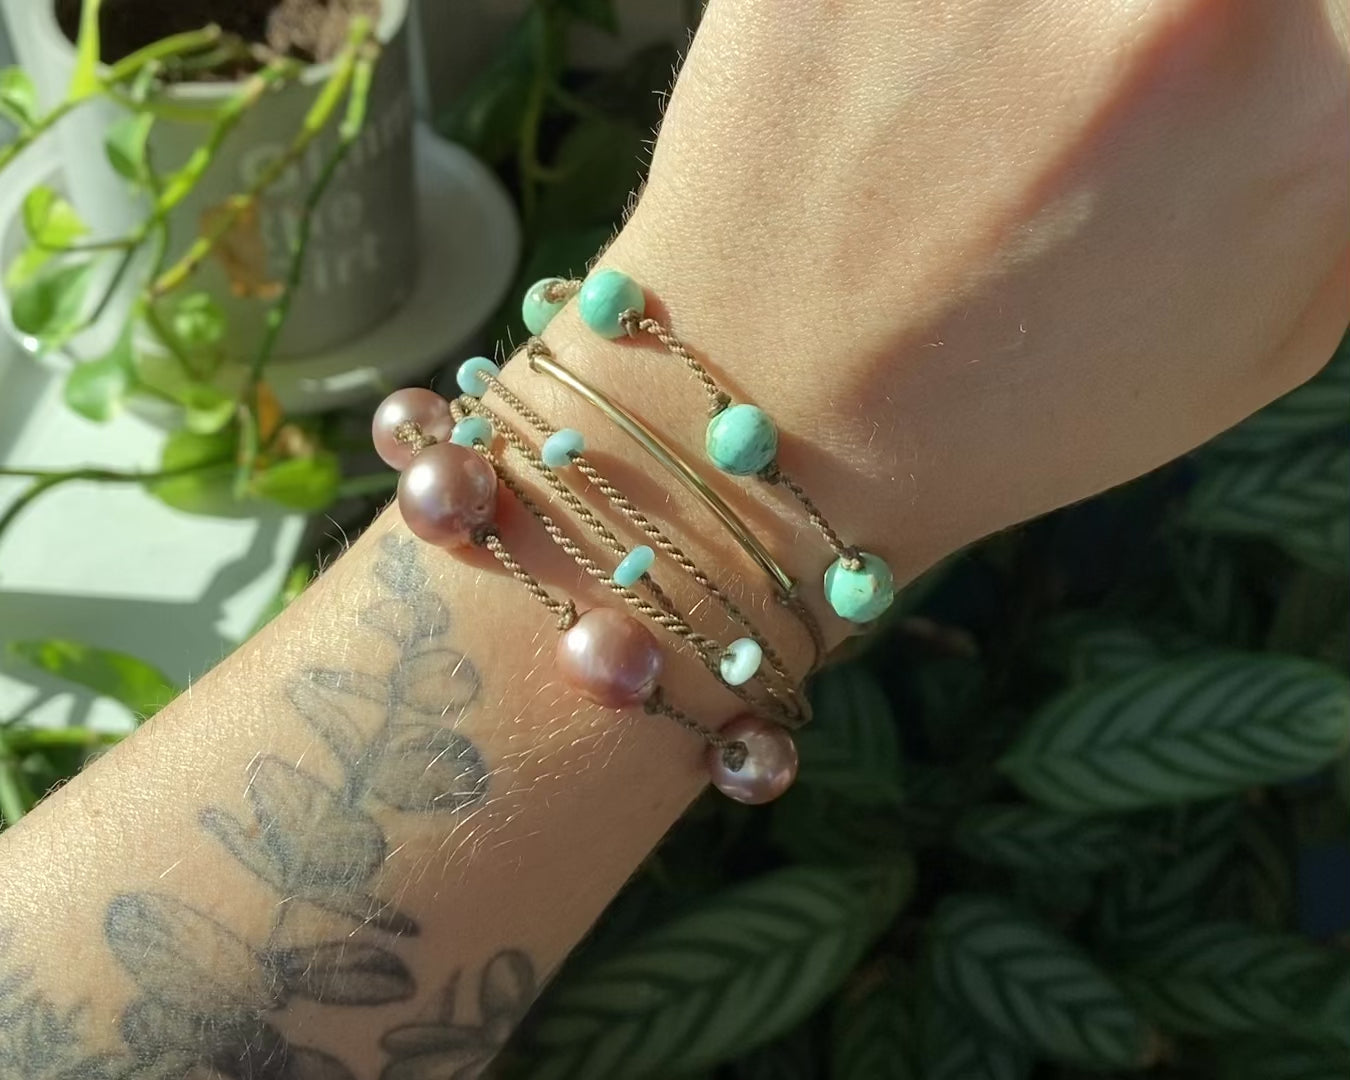 Catching Snowflakes - Bracelet Stack (15% off)